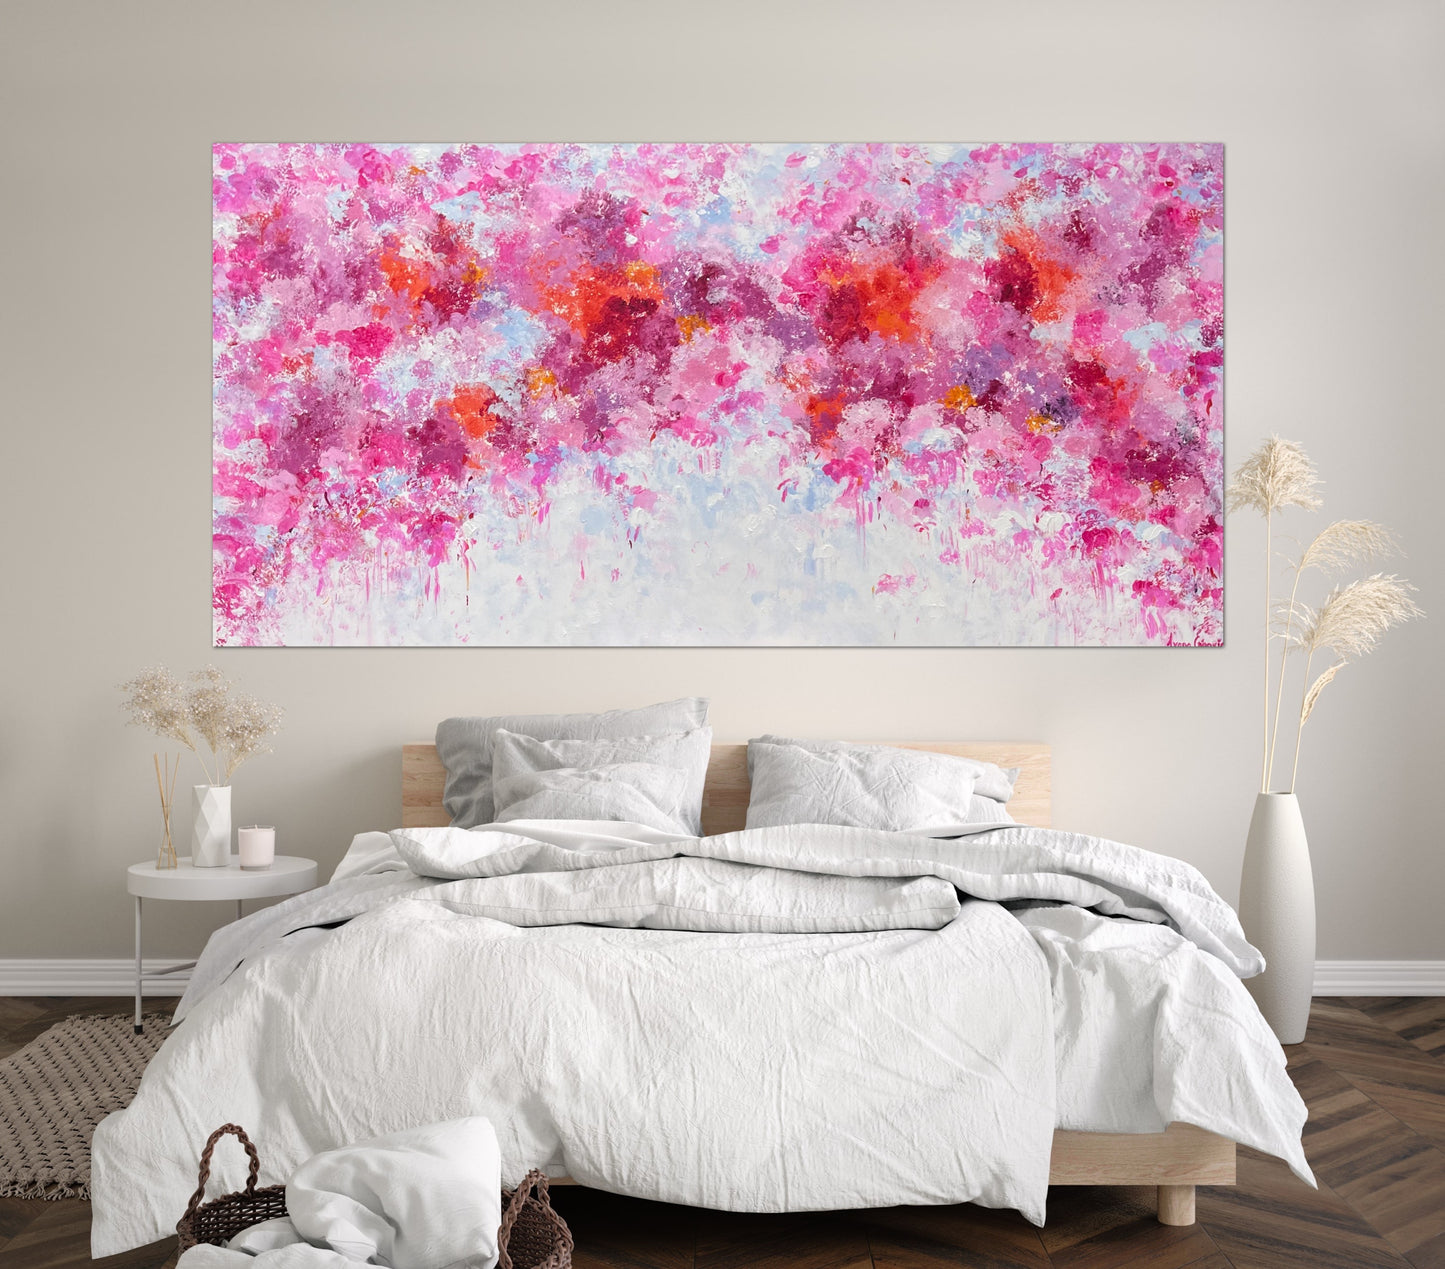 It's Love No 18 - Large Floral Original Abstract